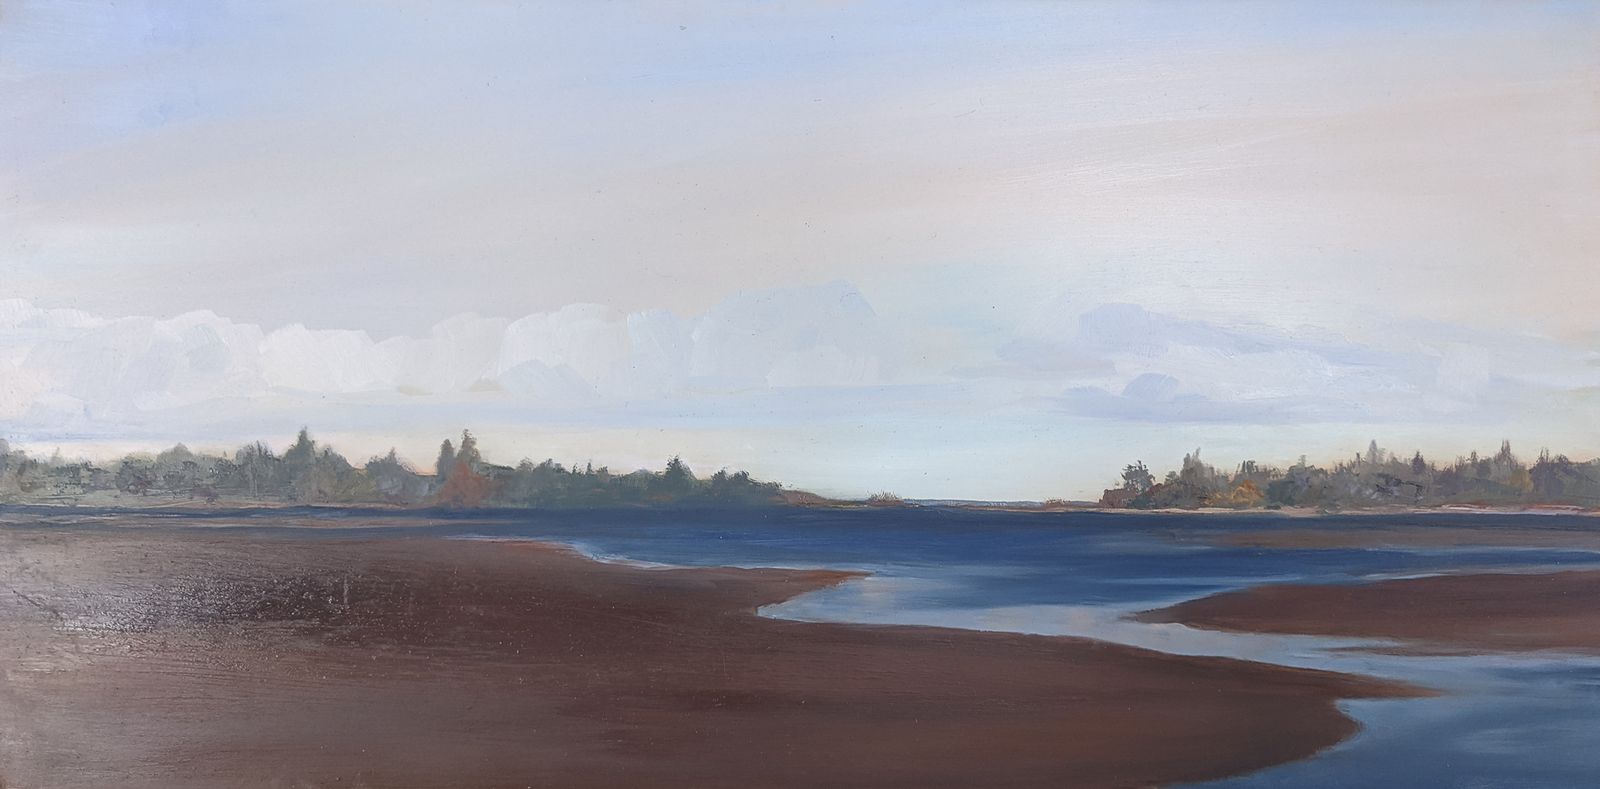 This is an oil painting looking over rich brown mudflats and a blue inlet looking toward a peninsula and open water. A row of white clouds hover above.